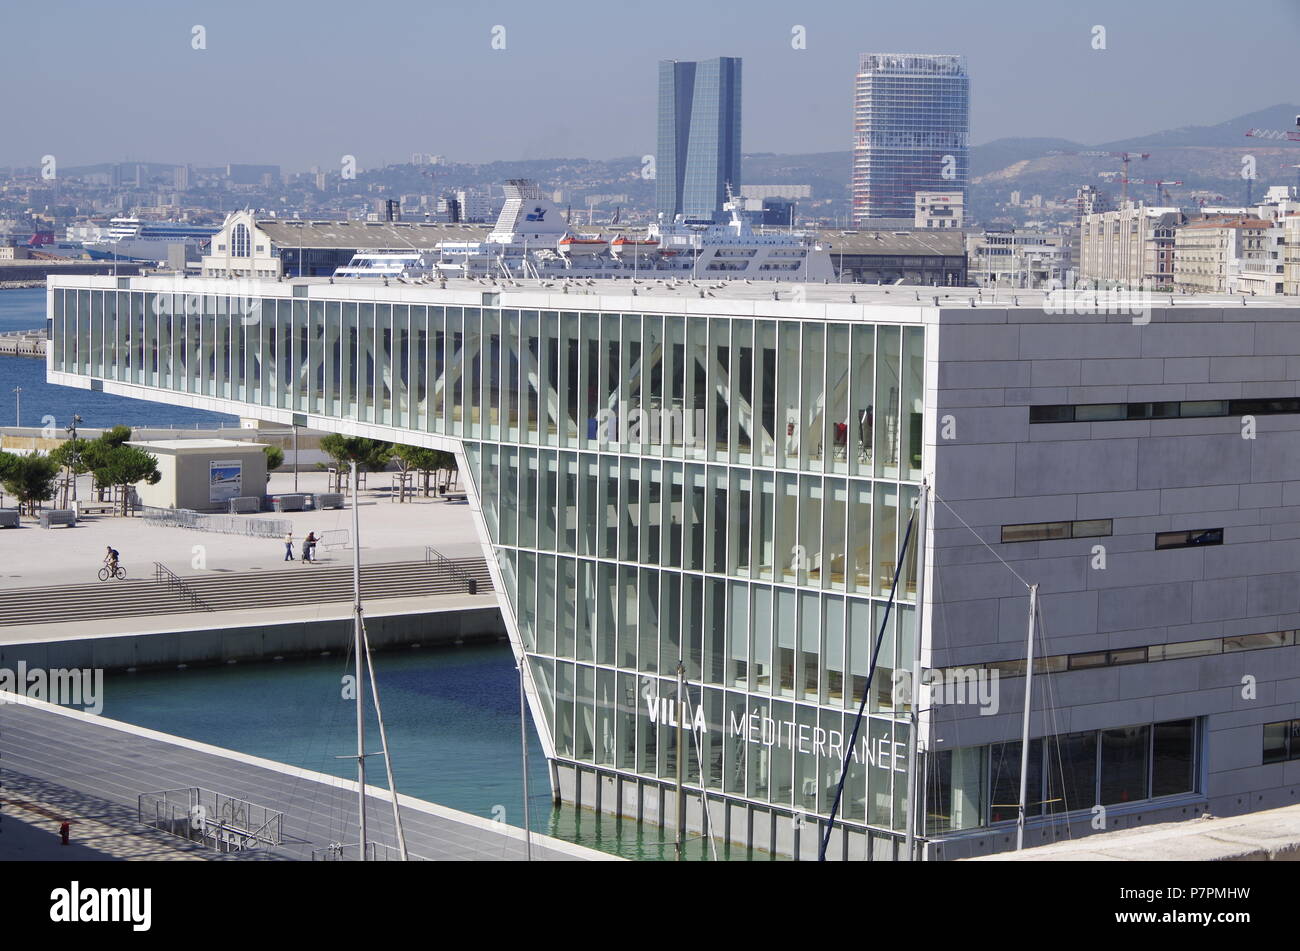 The Villa Méditerranée, a conference and exhibition venue owned by the regional authority on former docklands site, with massive cantilever Stock Photo